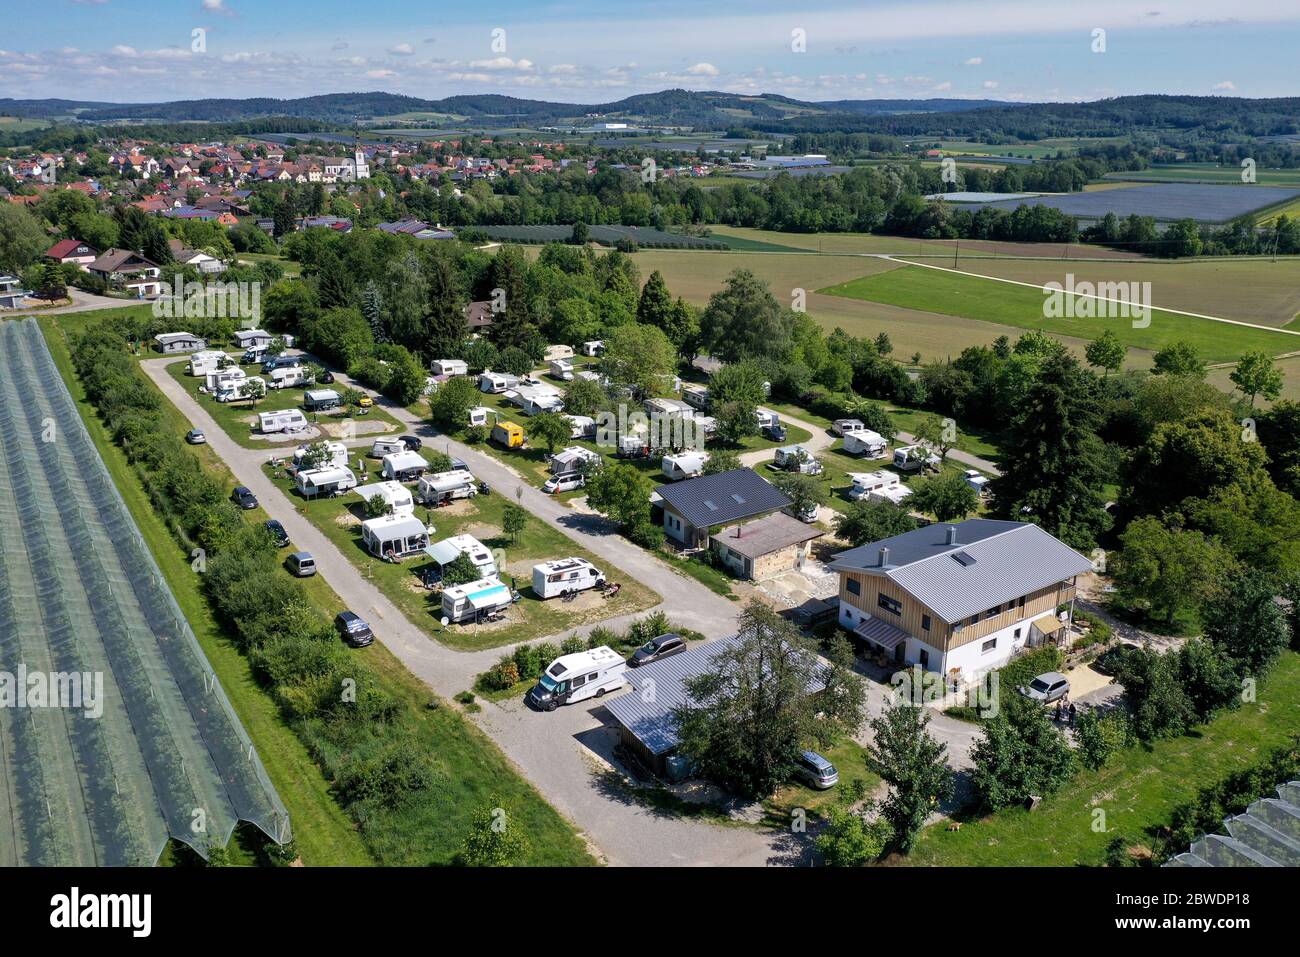 Wahlwies Bei Stockach, Germany. 13th Mar, 2020. The Wahlwies camping garden  of operators Volker and Andrea Knaust is located on the outskirts of  Wahlwies, which is only a few kilometres away from